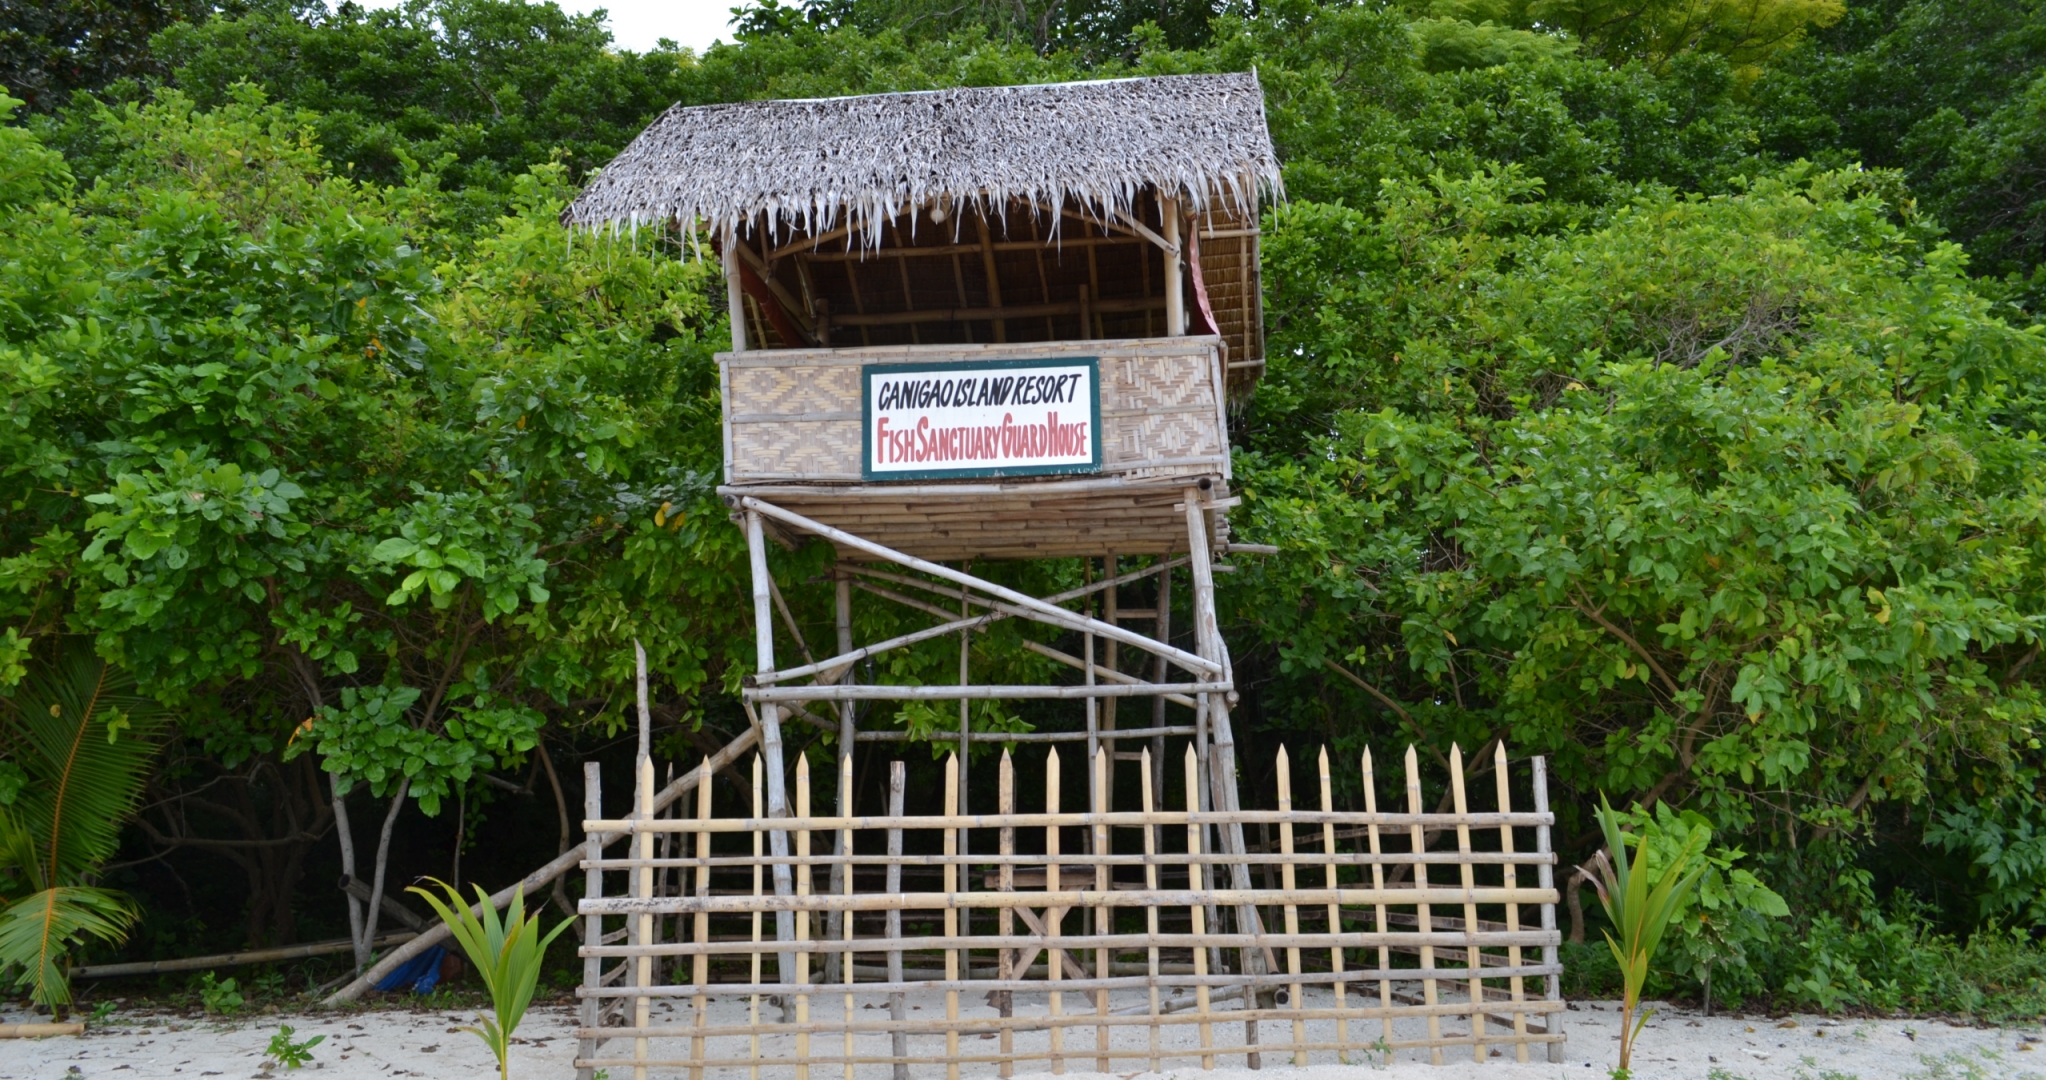 Canigao Island, Structures, Guard House, Islands, Leyte, Philippines, Mick